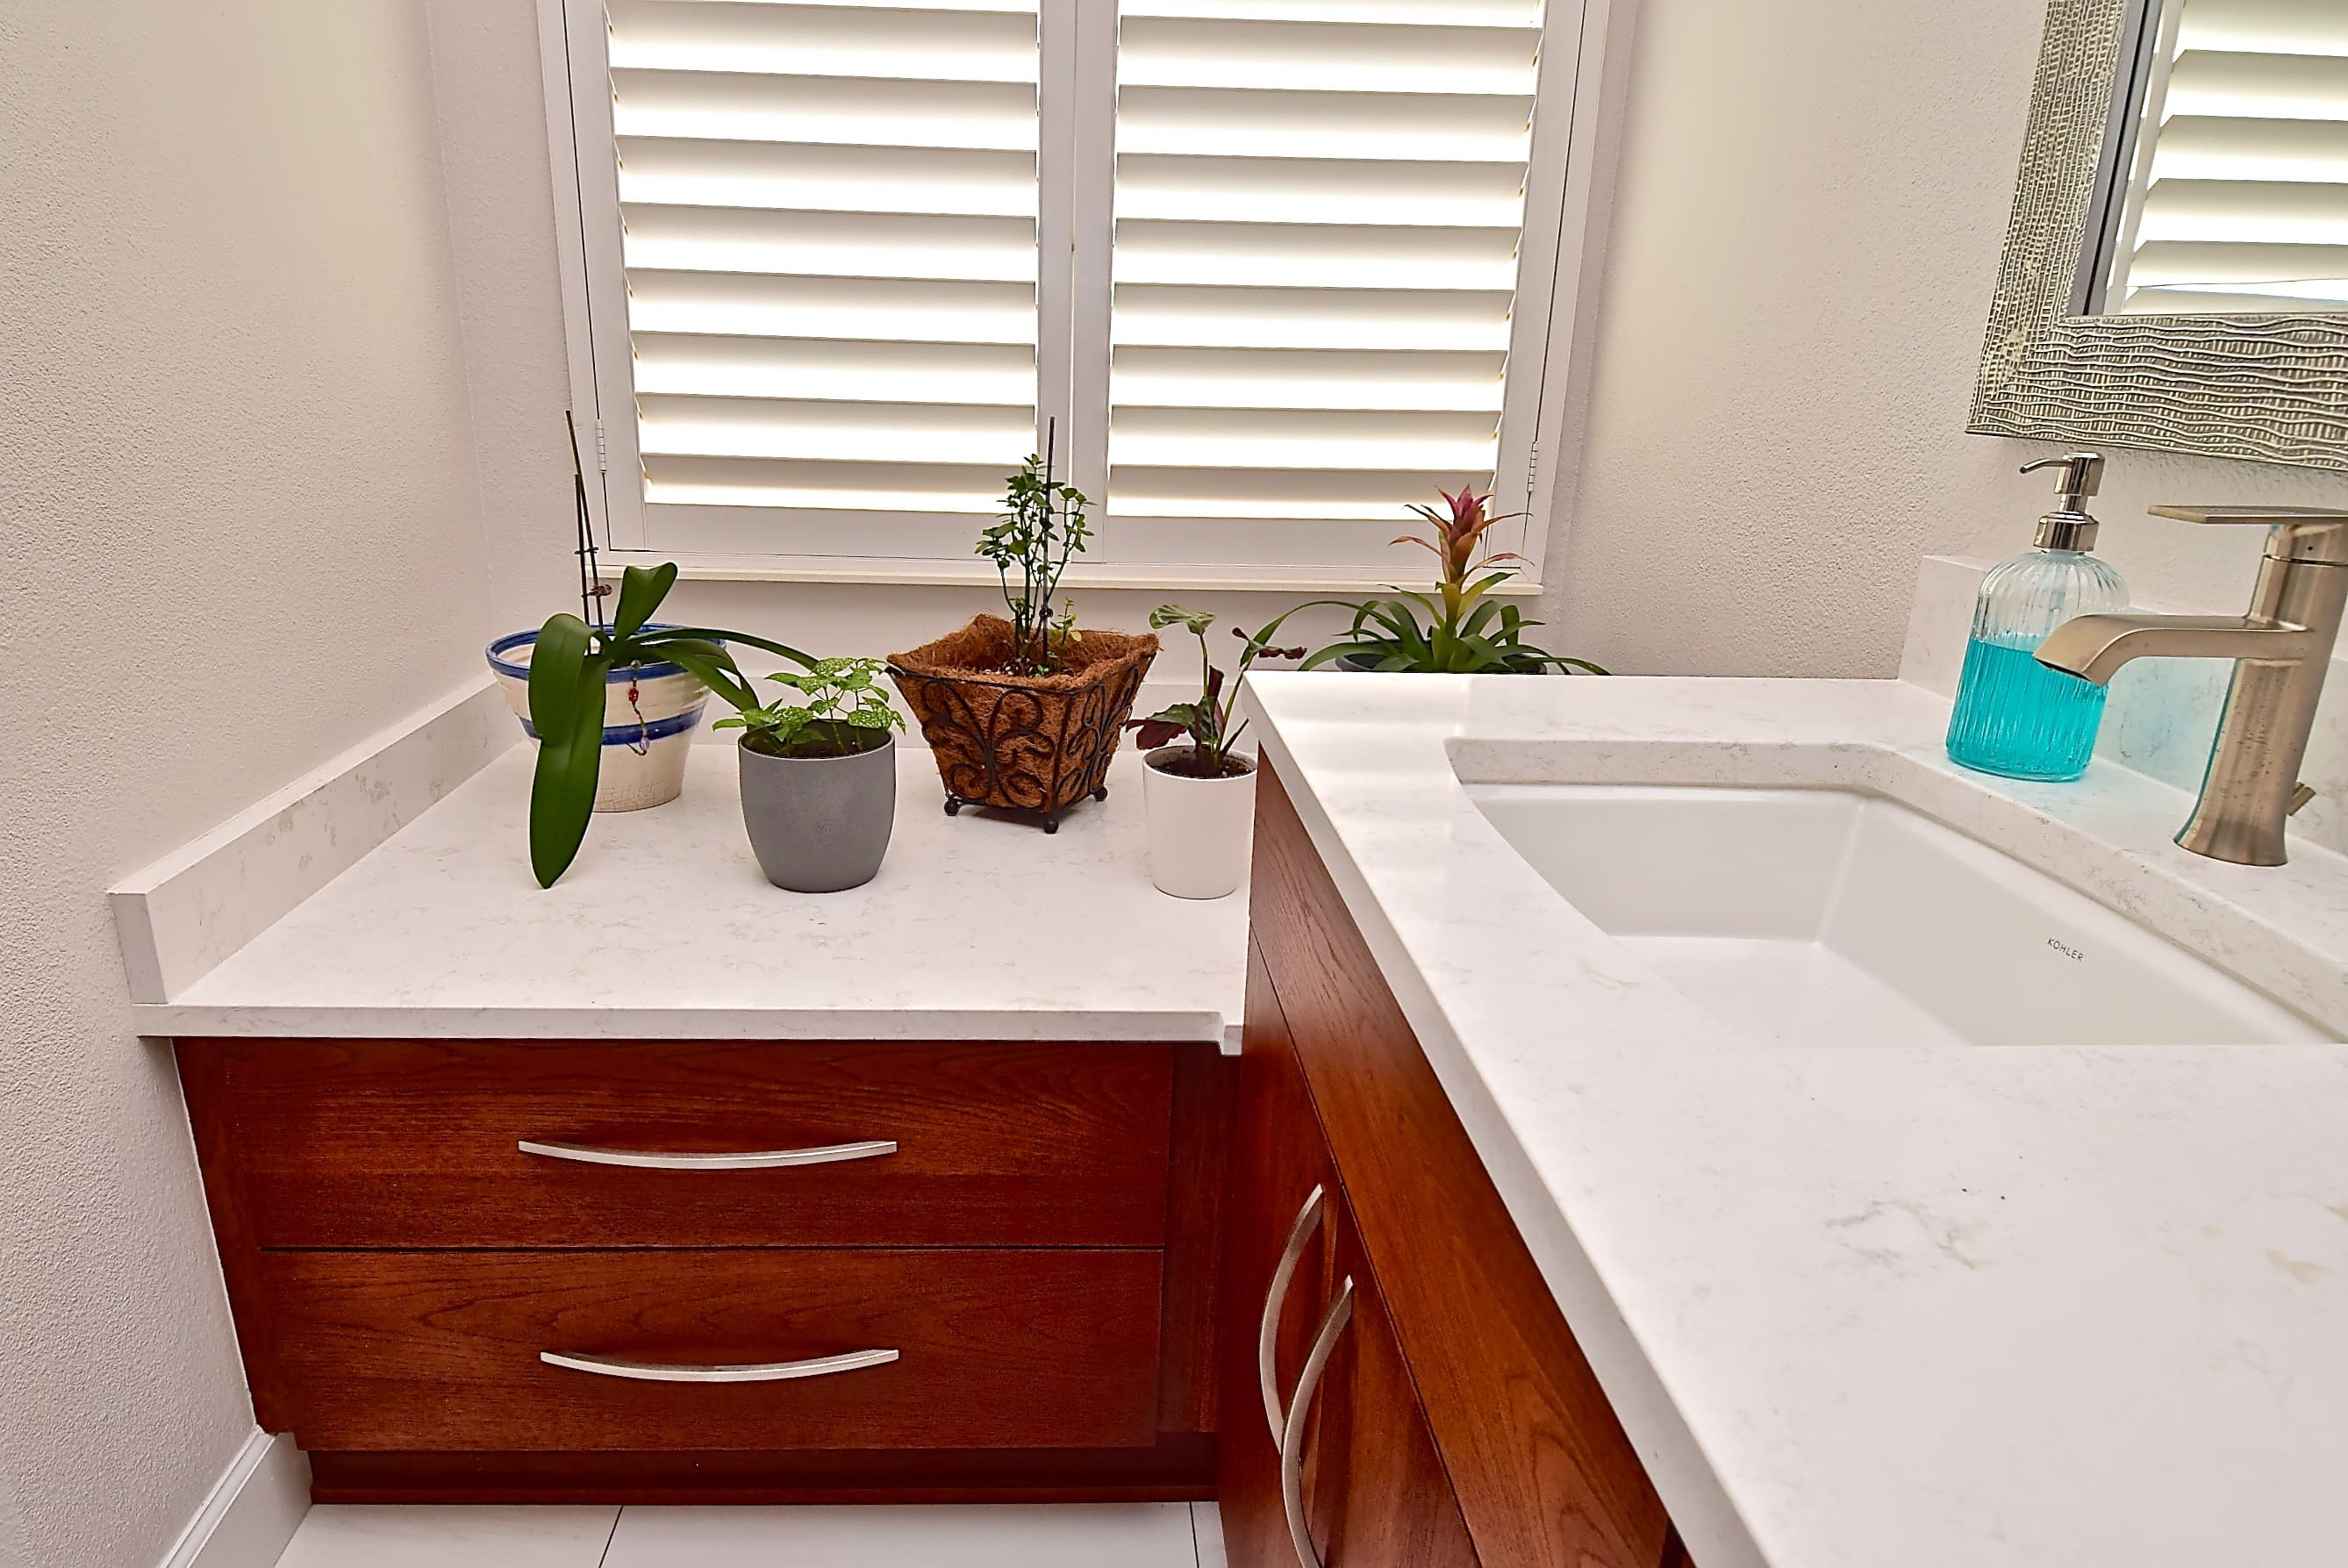 Double Vanity Sarasota Bathroom Remodel with Counter for Plants